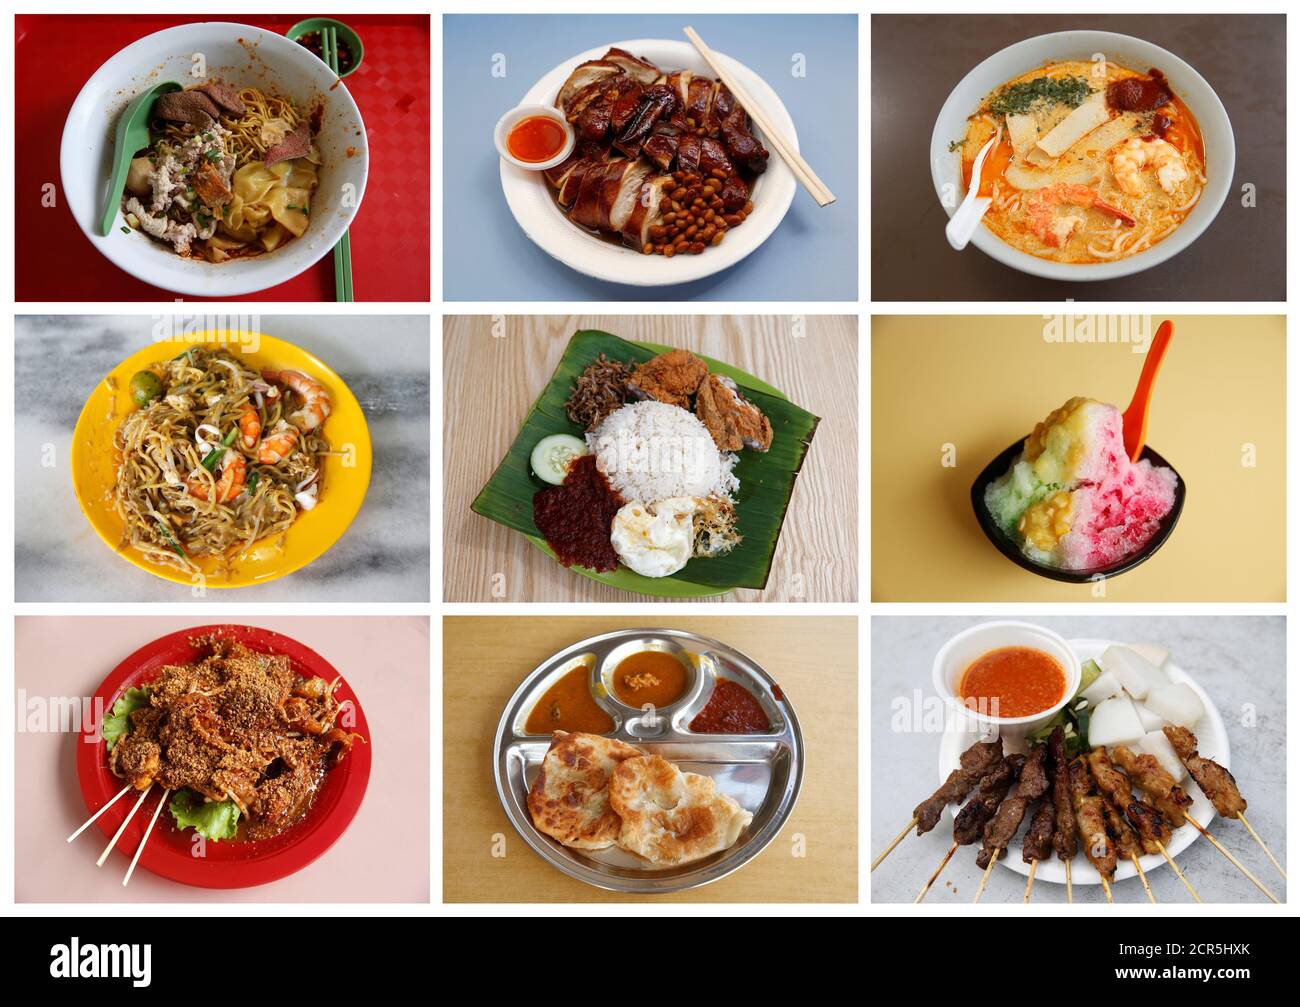 A Combination Photo Shows Various Popular Street Foods Under 6 From Various Hawker Food Stalls And Eateries In Singapore Taken Between July 28 To 31 2016 Top Row L To R Bak